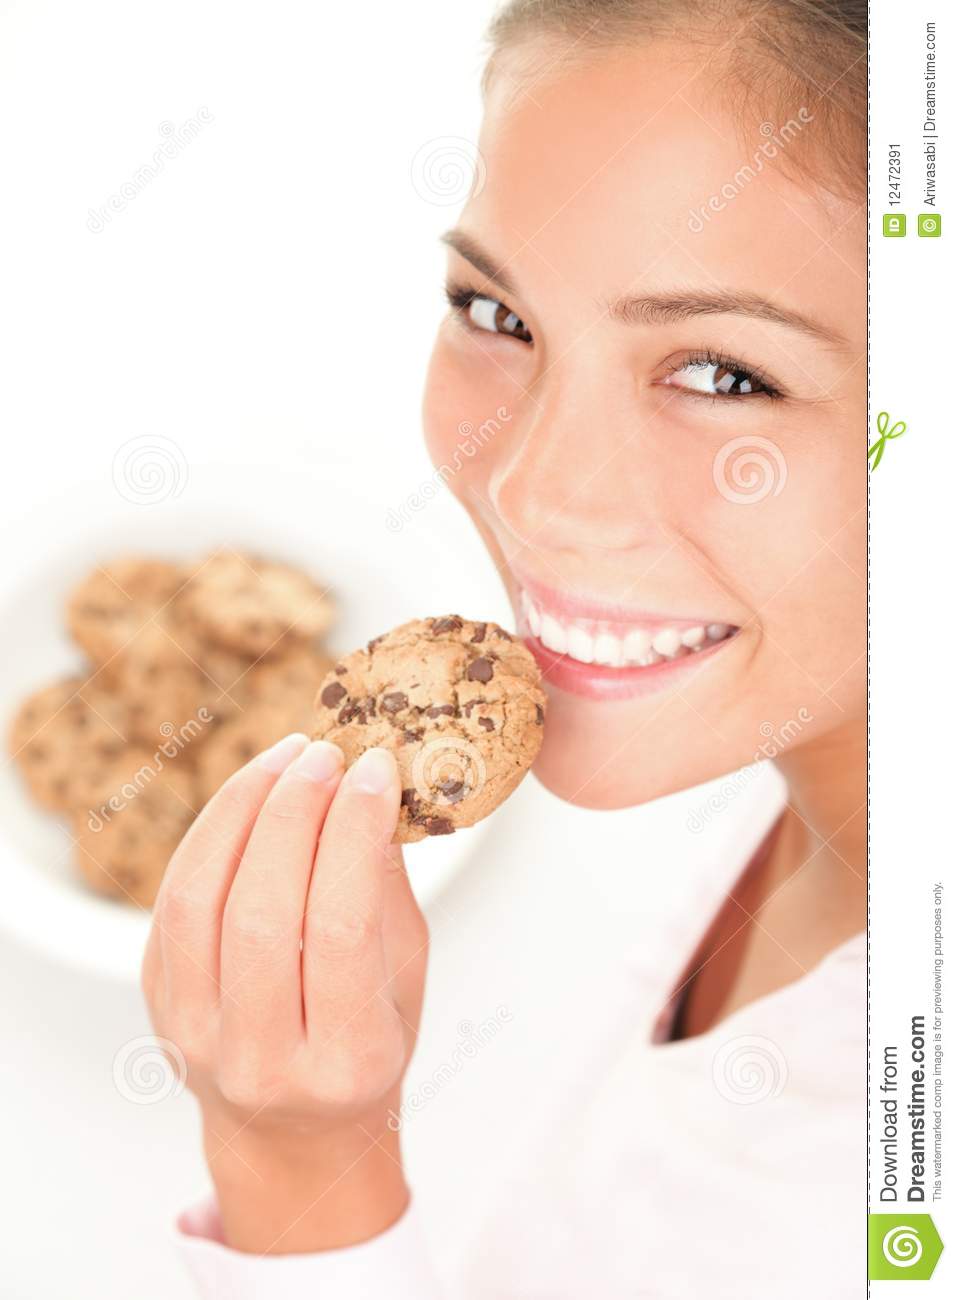 Chocolate Chip Cookies Eating  Cute Mixed Race Chinese   Caucasian